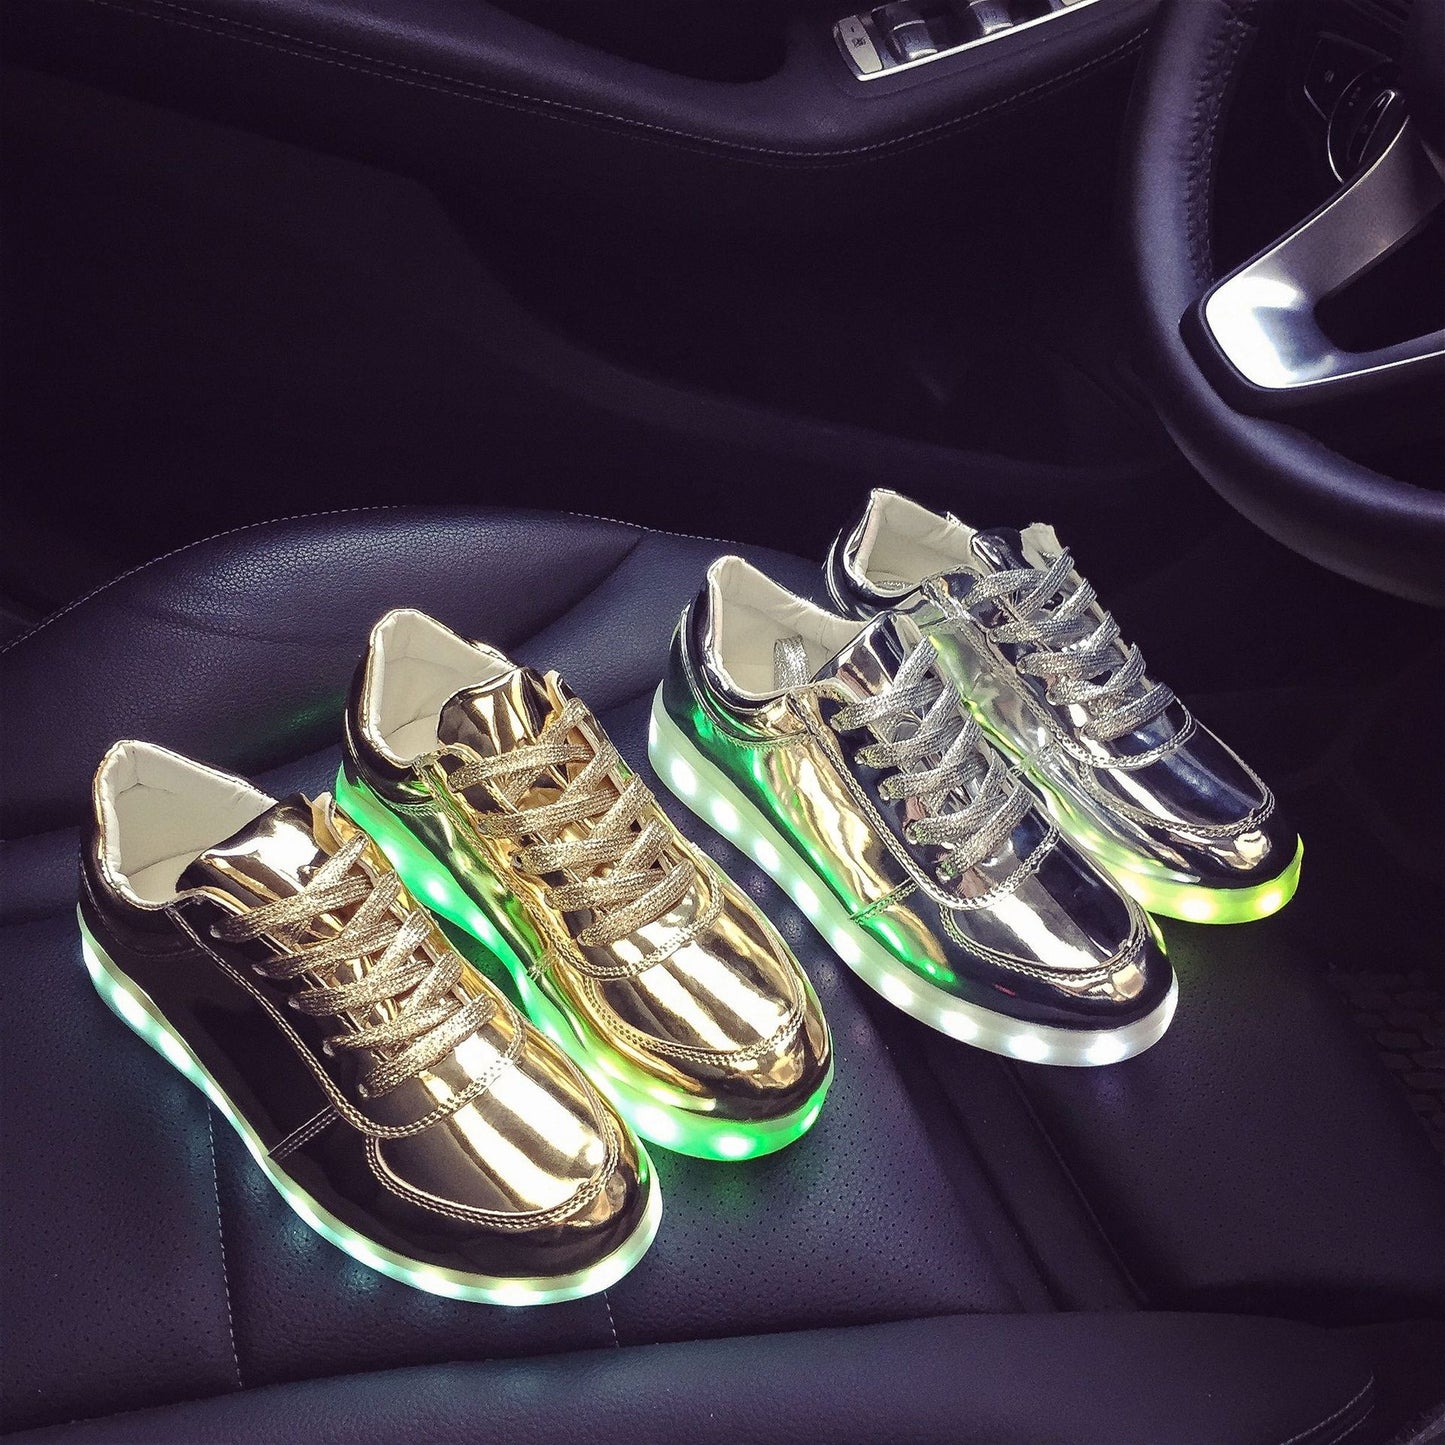 LED light shoes USB charging fluorescent luminous shoes lace up sports sneakers